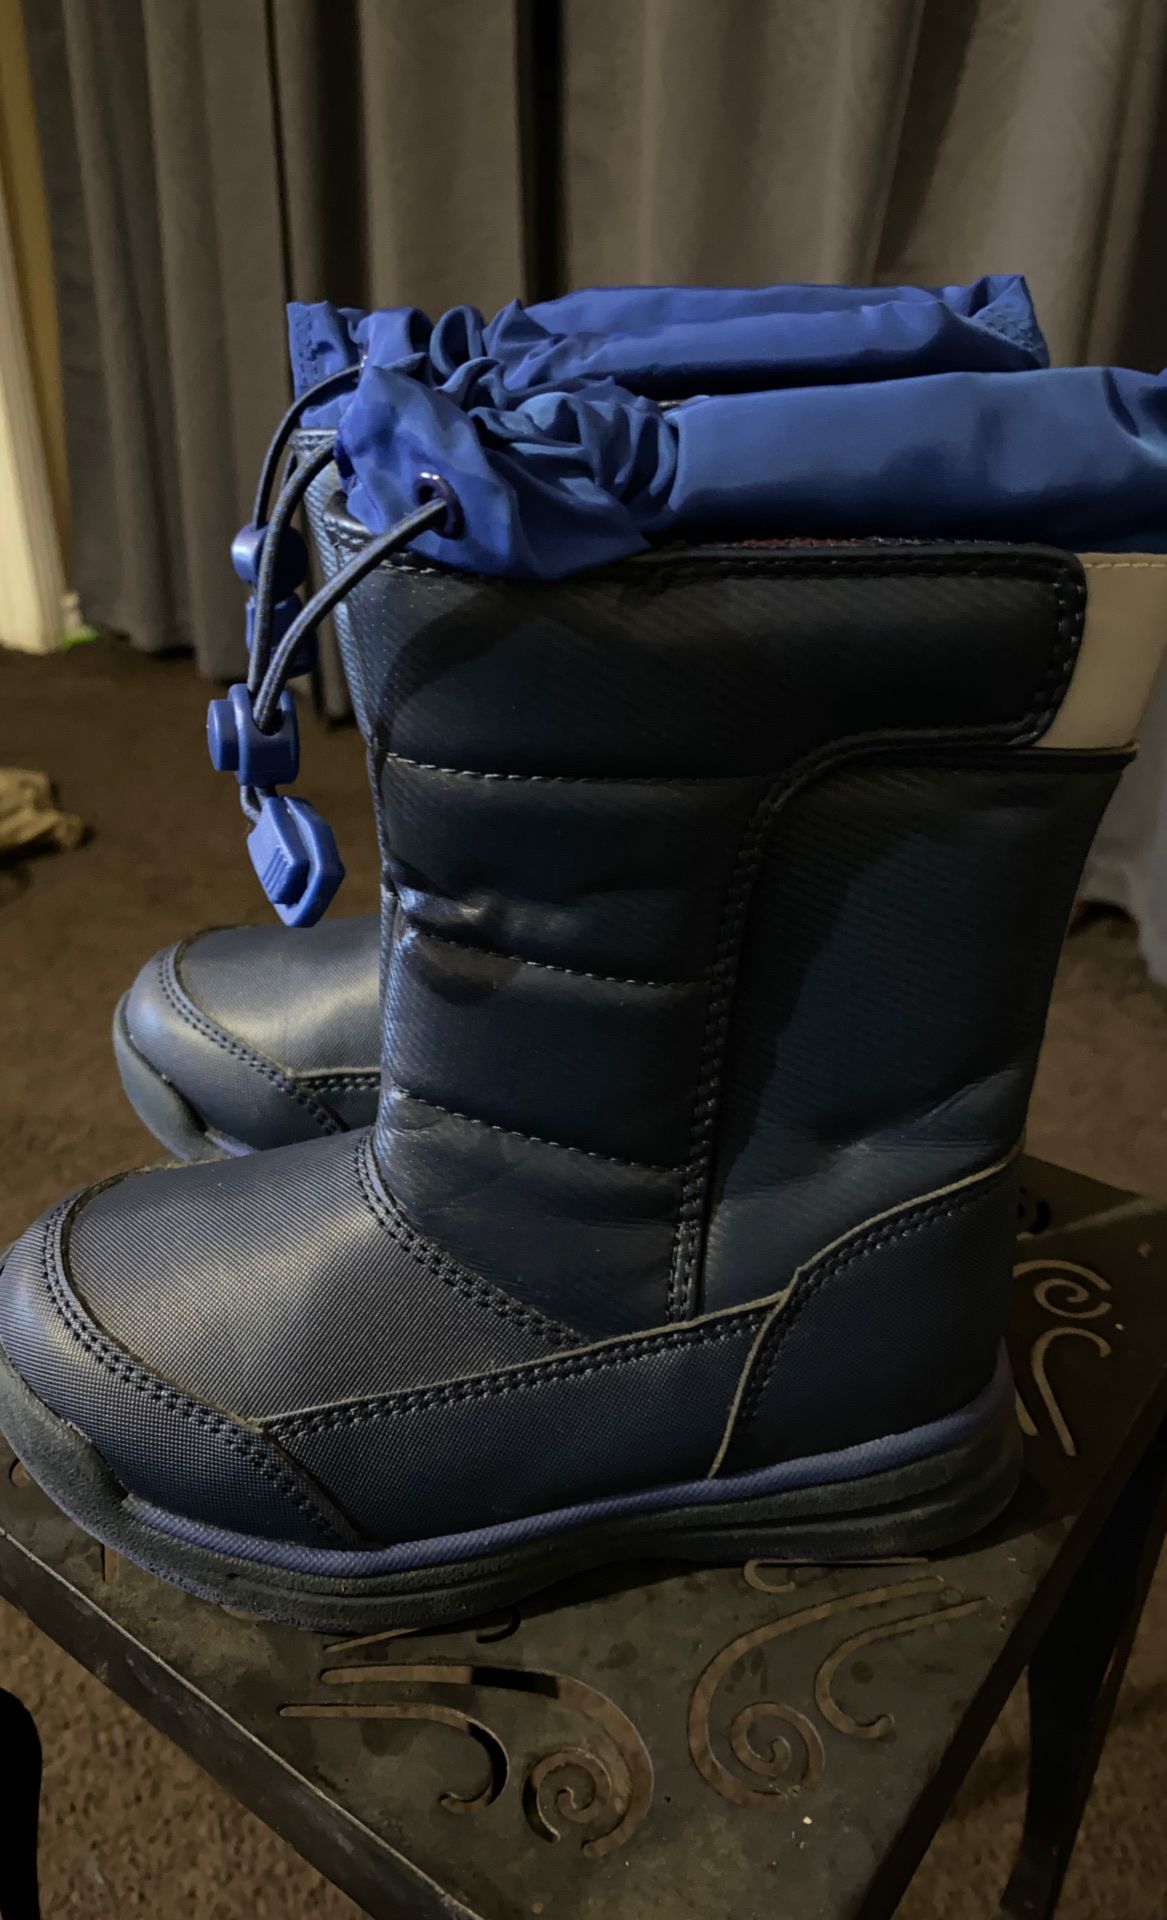 Toddler Boy size 10 snow boots rain boots